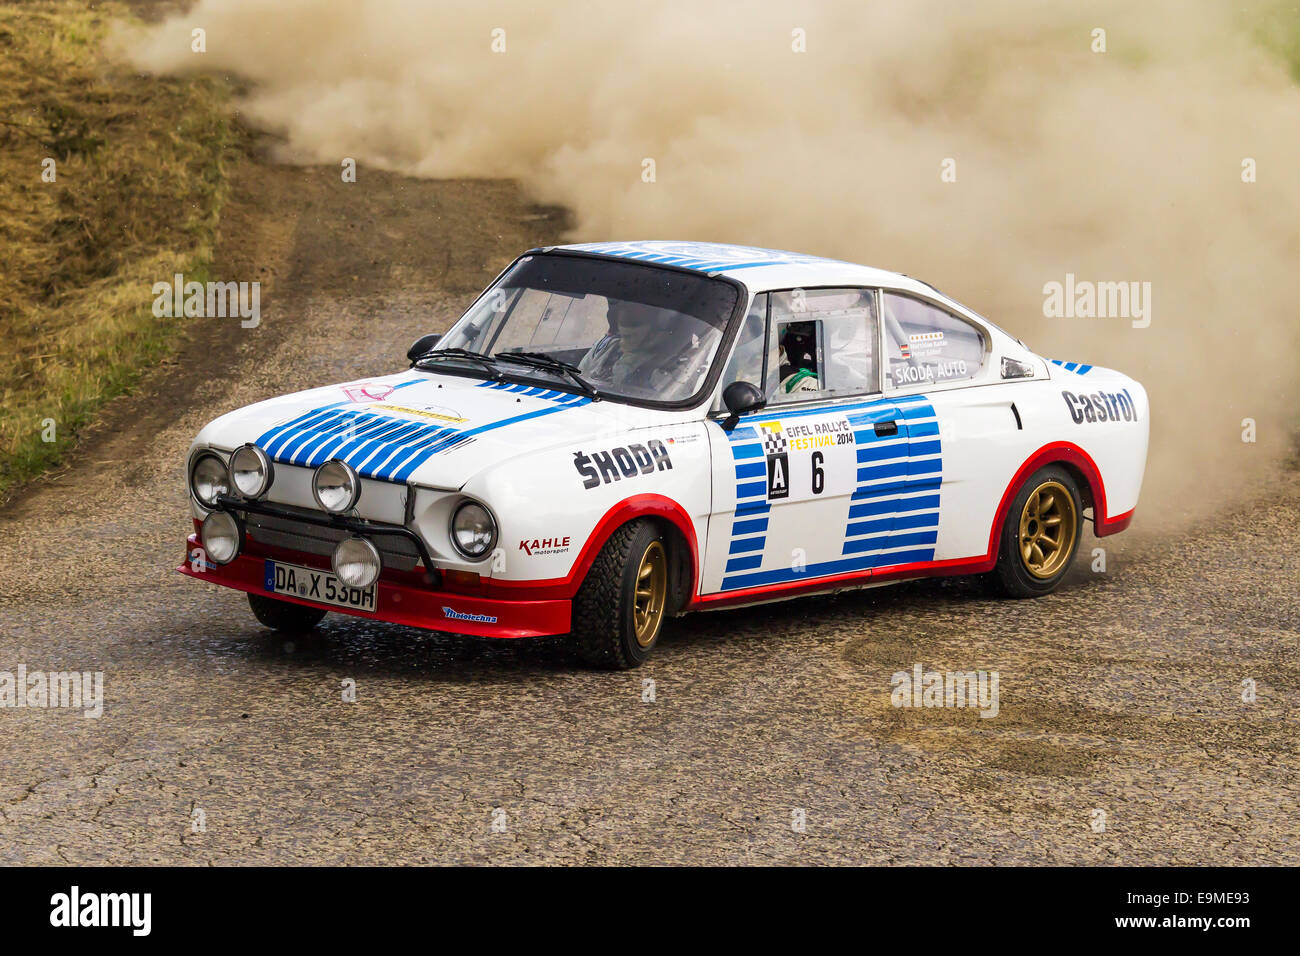 Page 2 - Vintage Skoda High Resolution Stock Photography and Images - Alamy